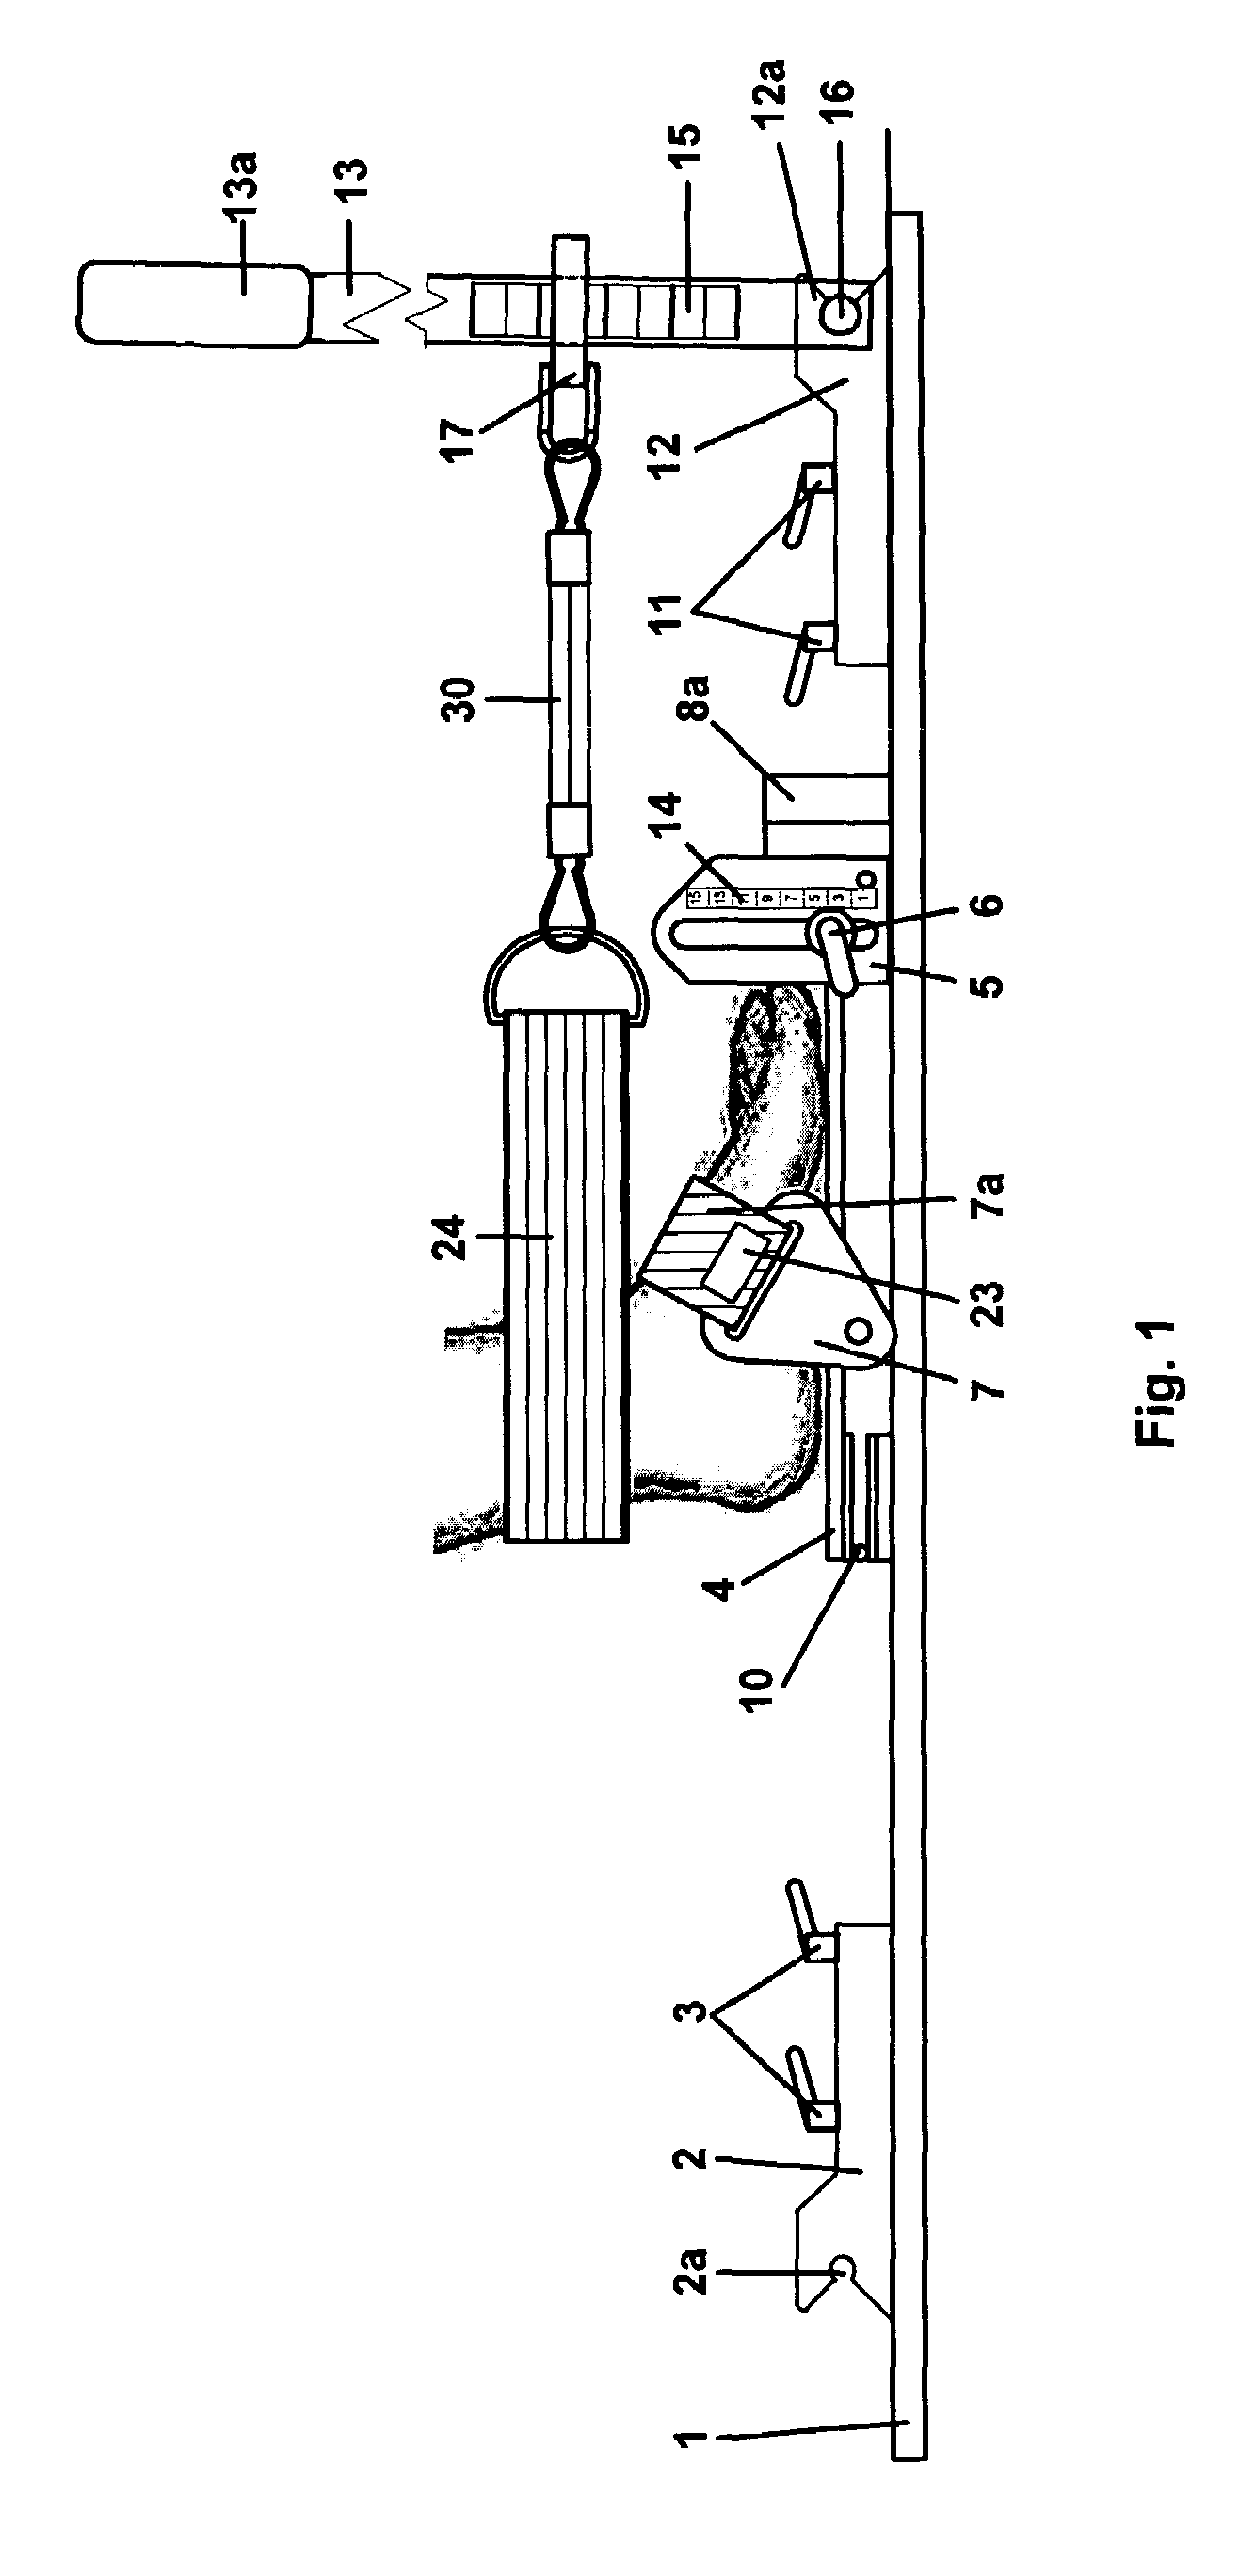 Method and apparatus for anterior and posterior mobilization of the human ankle